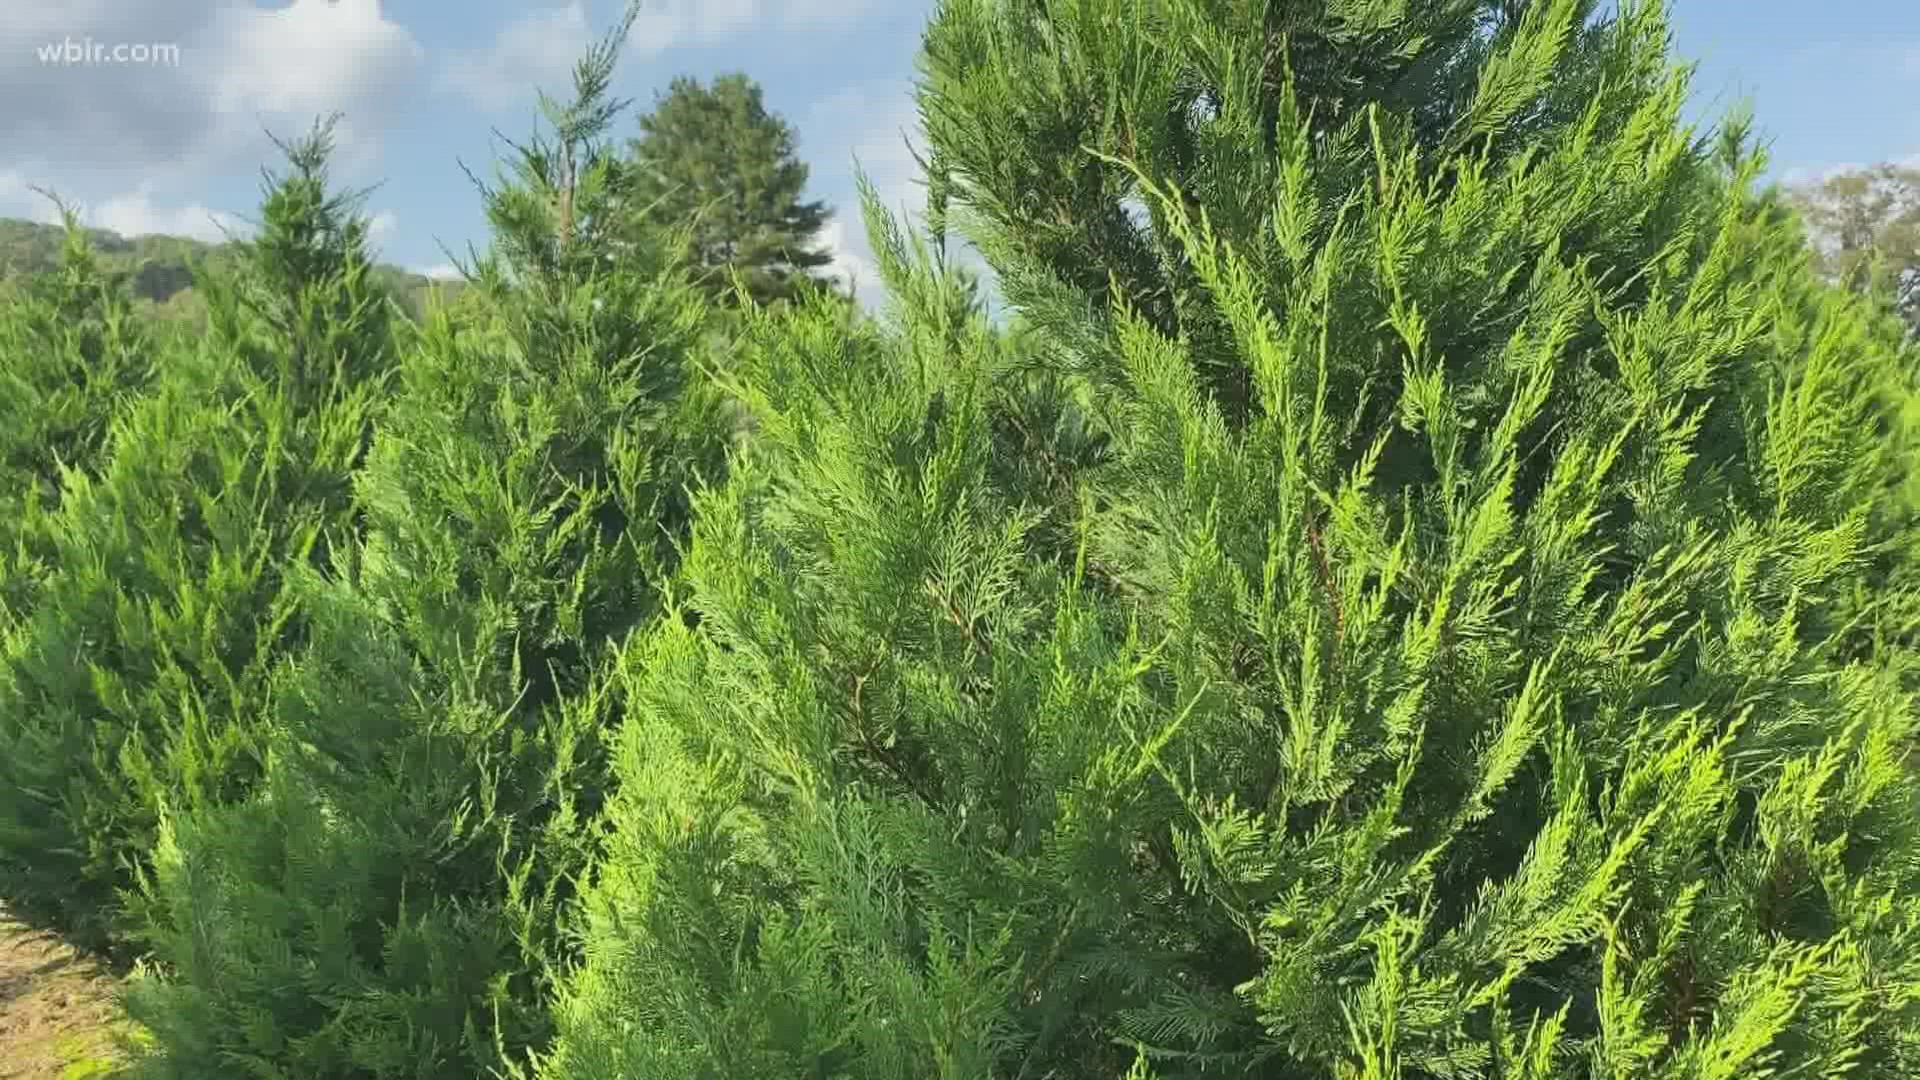 The American Christmas Tree Association predicted a major shortage for the 2021 holiday season.